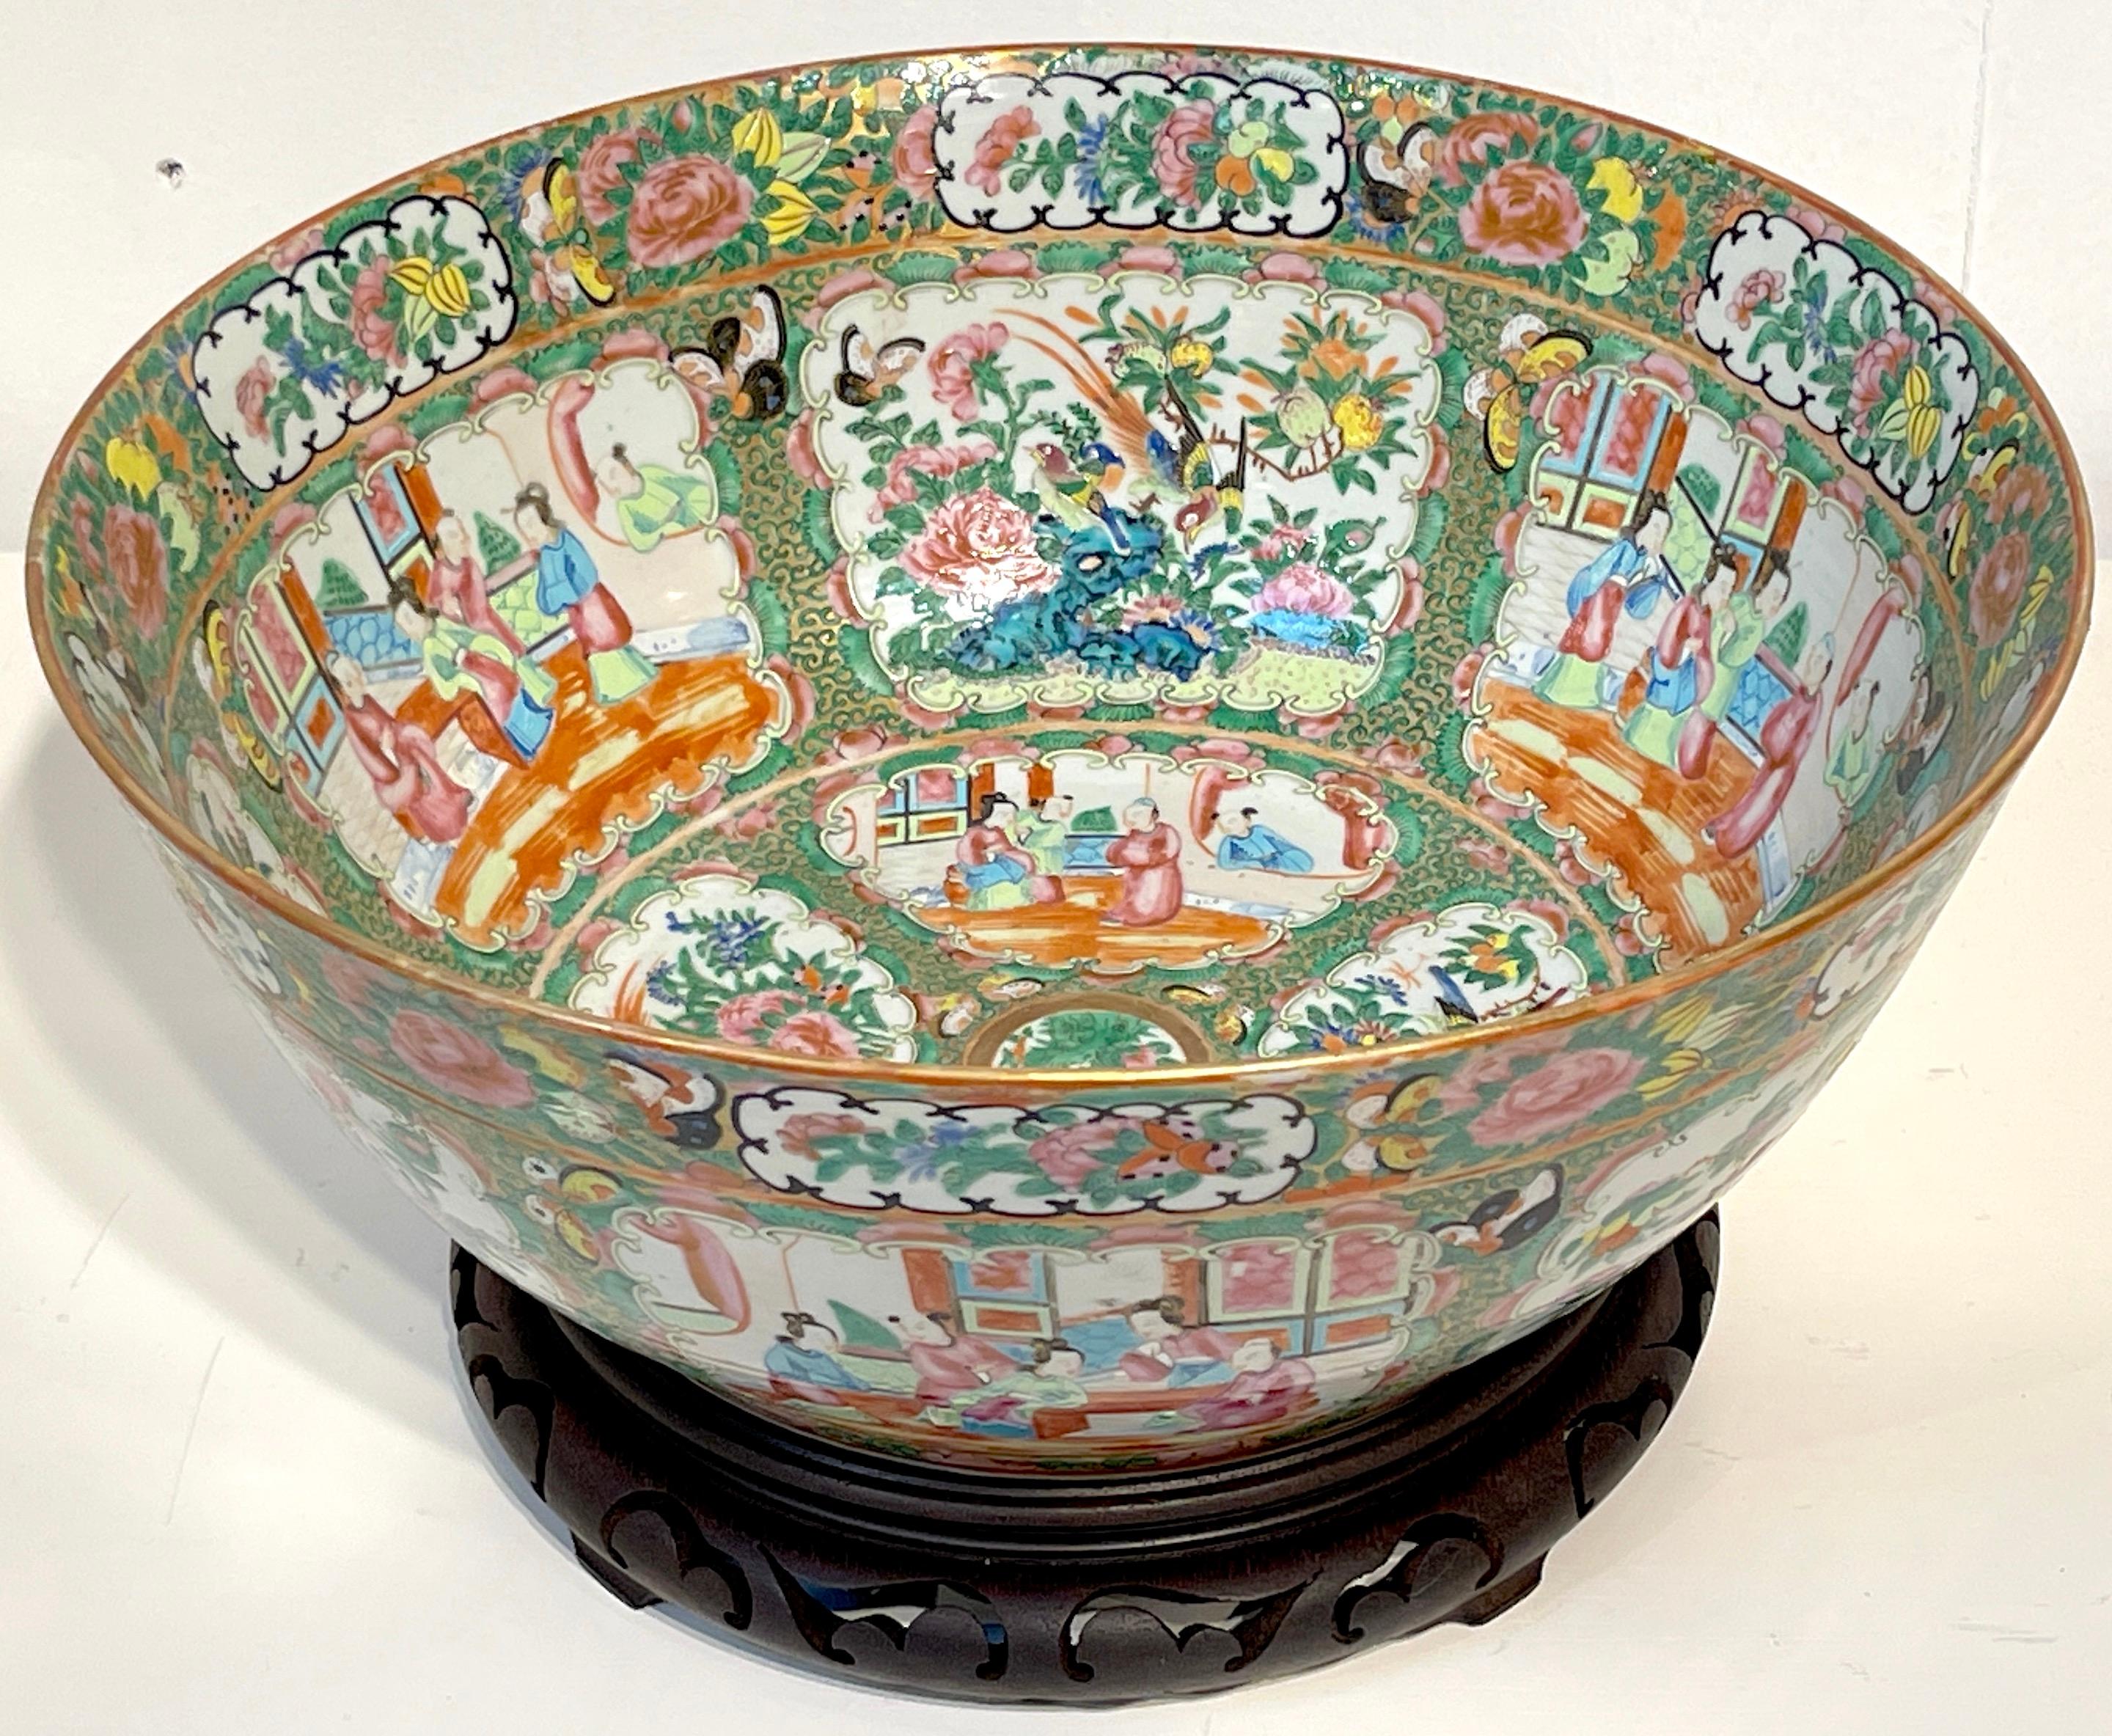 19th century Chinese Export Rose Medallion punch bowl, with stand 
China, circa 1860s, Later carved hardwood stand 20th Century 
Of generous size, bright and colorful, hand painted in the typical palette with gold tracing in the court ladies hair.